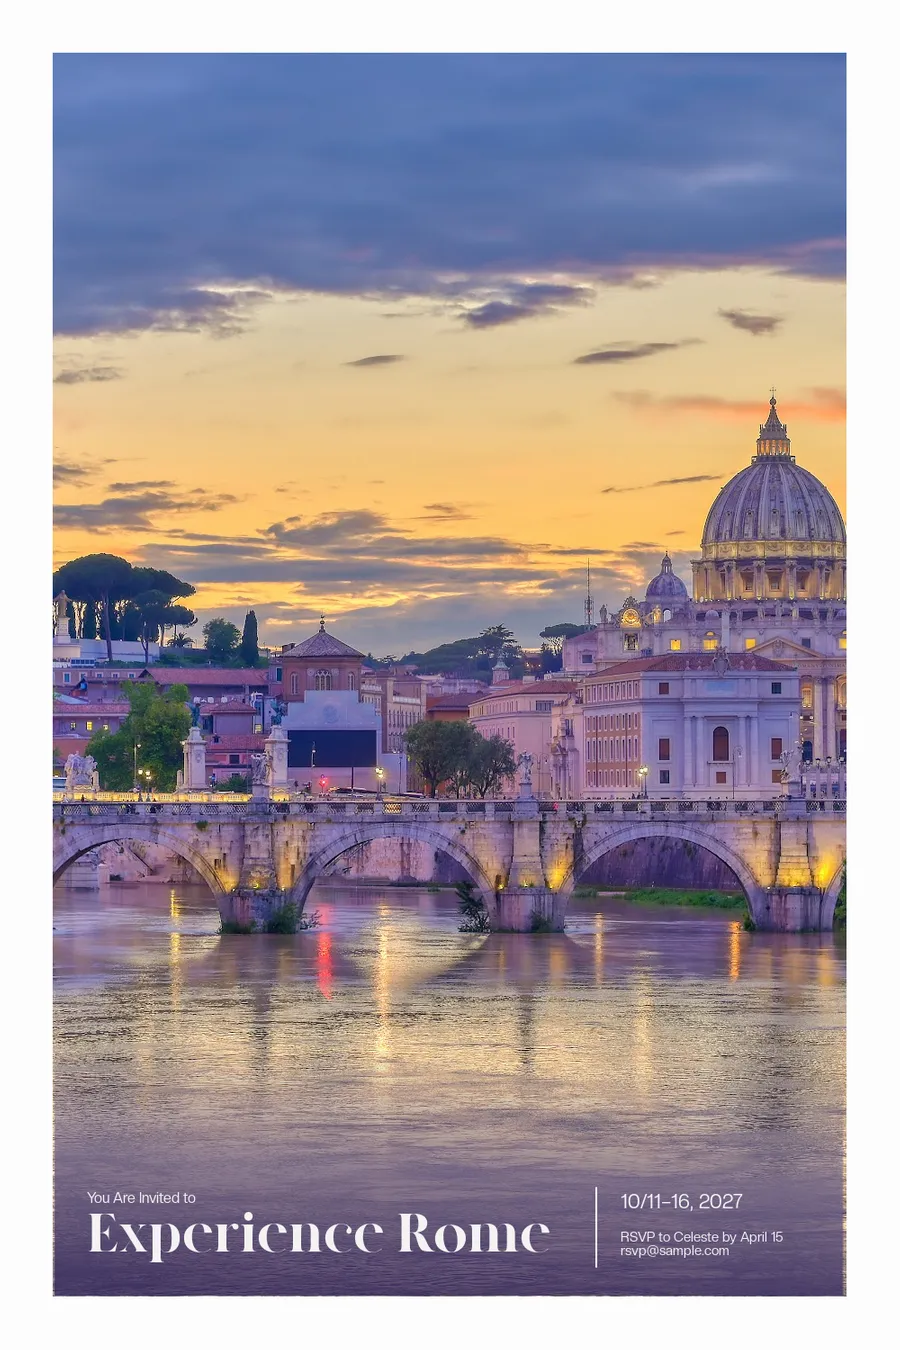 You are invited to experience Rome (Pinterest Ad) cards-photo template